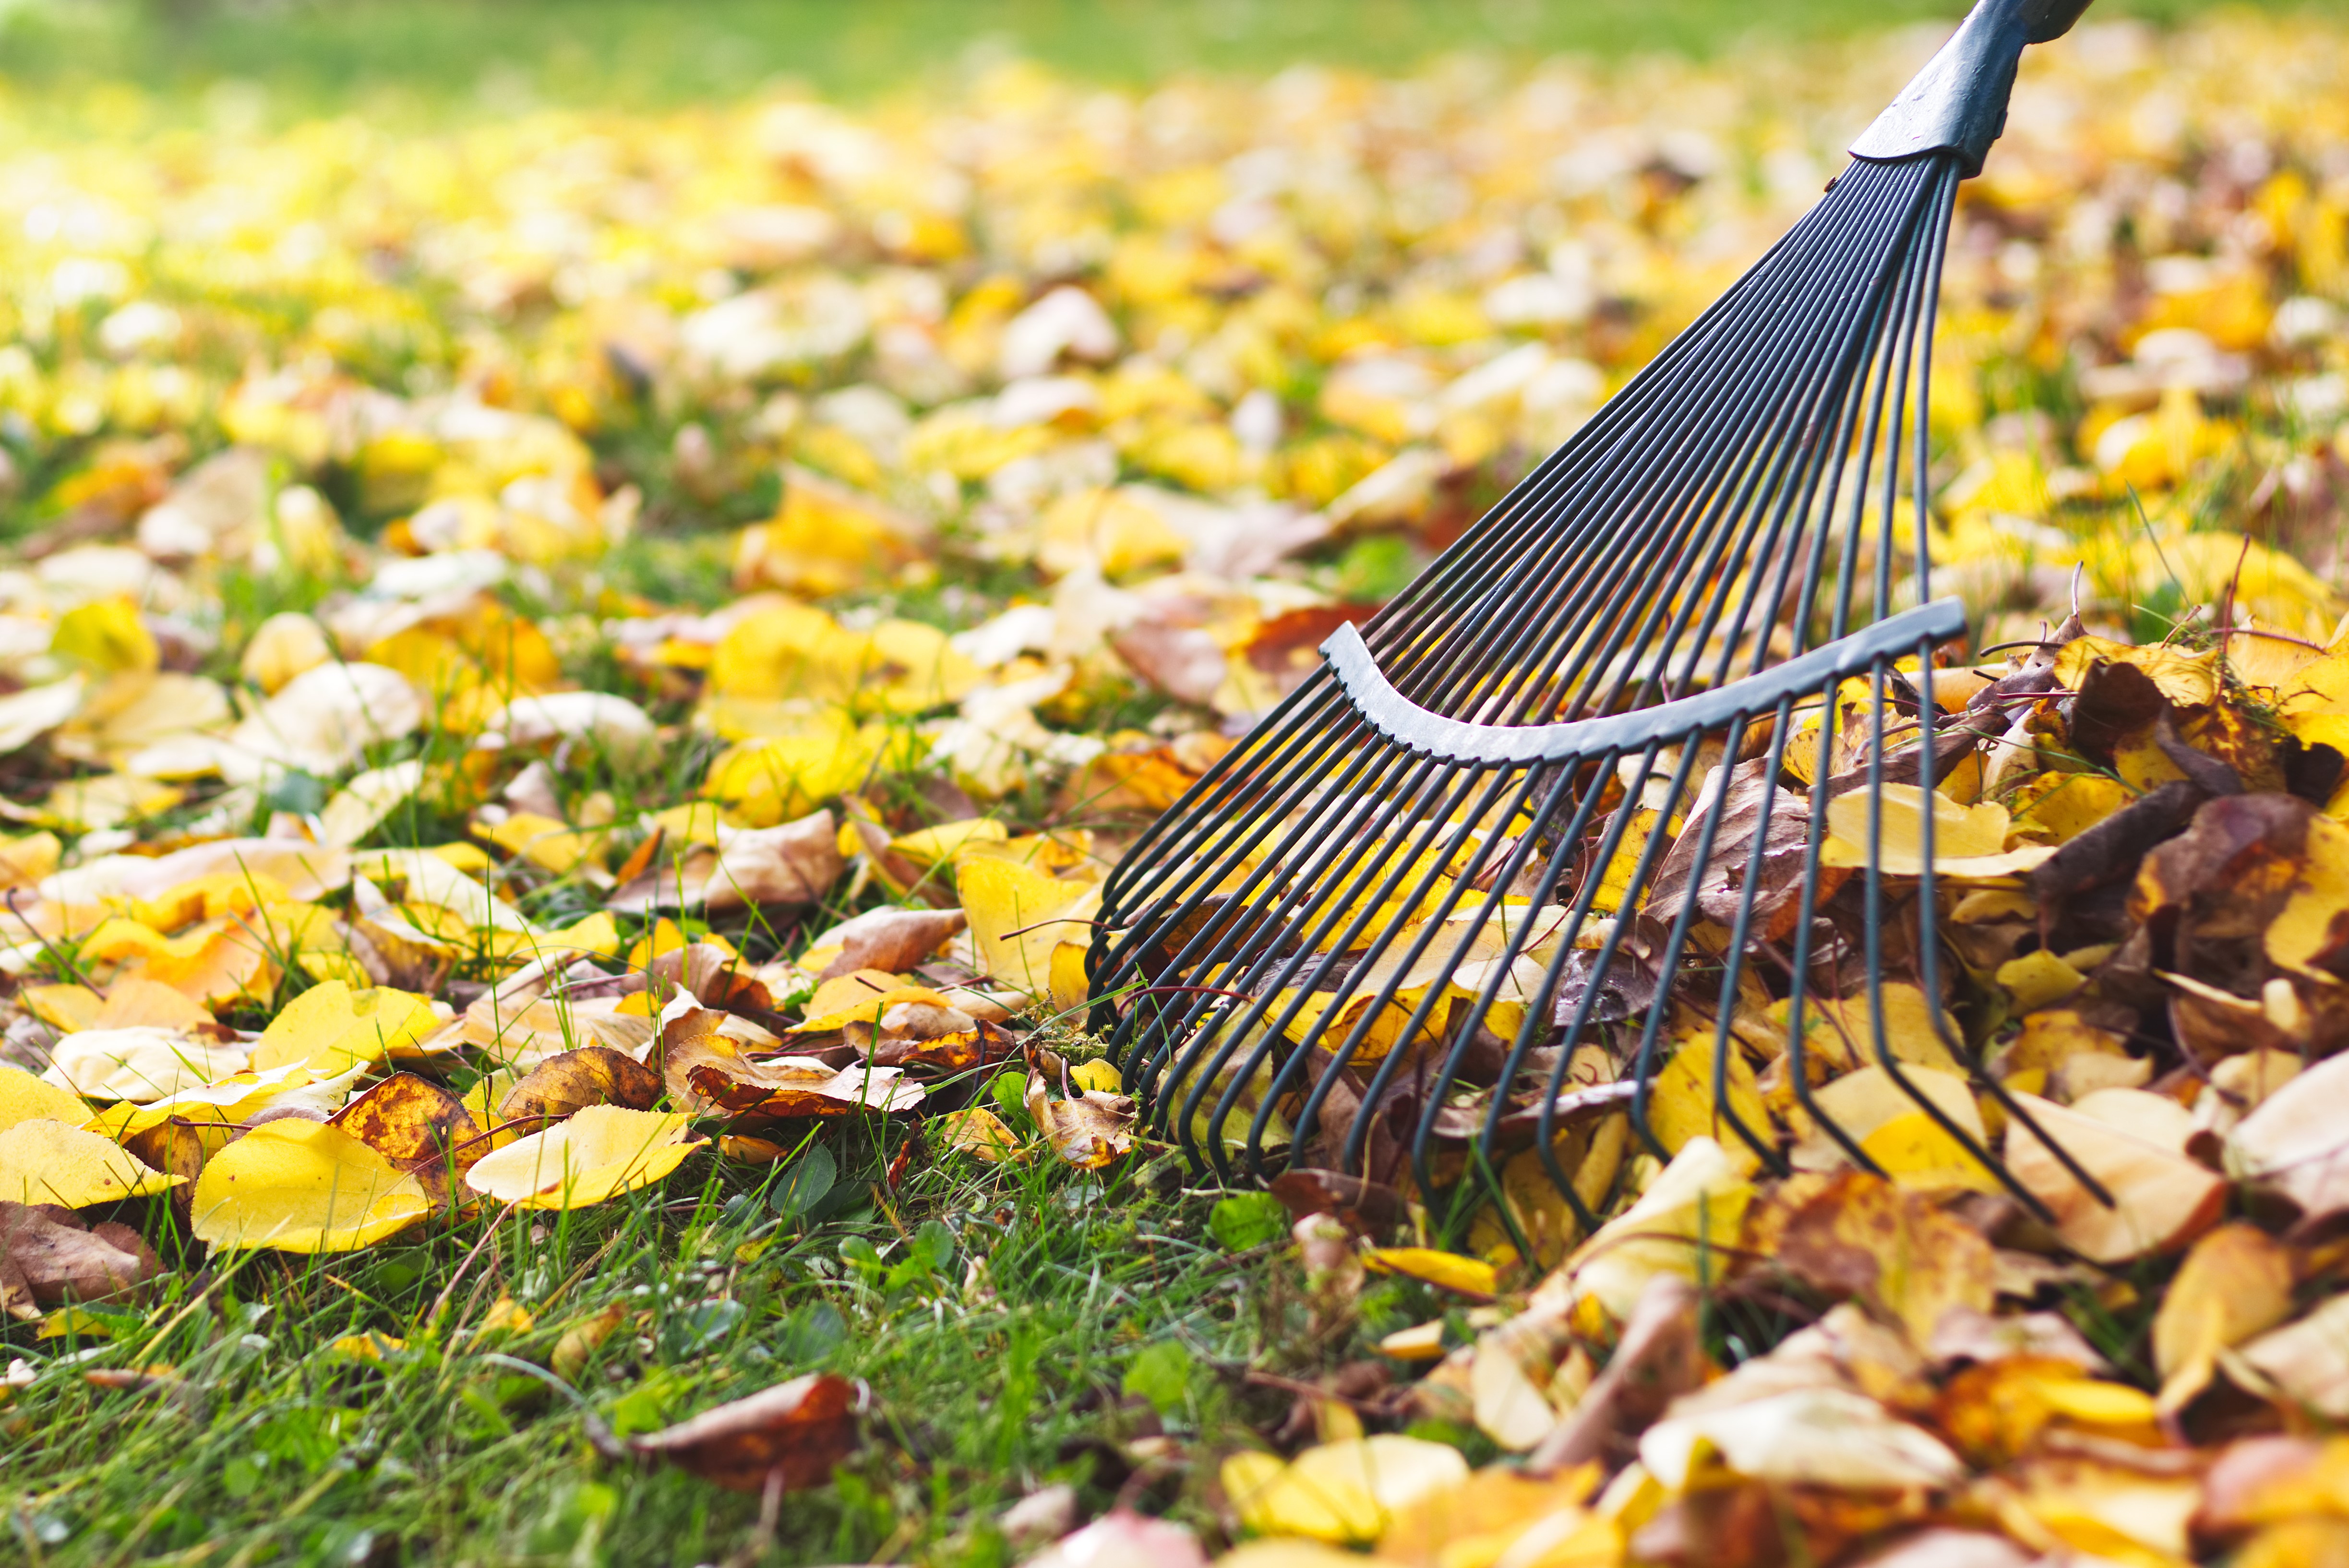 leaves on Lawn being Raked